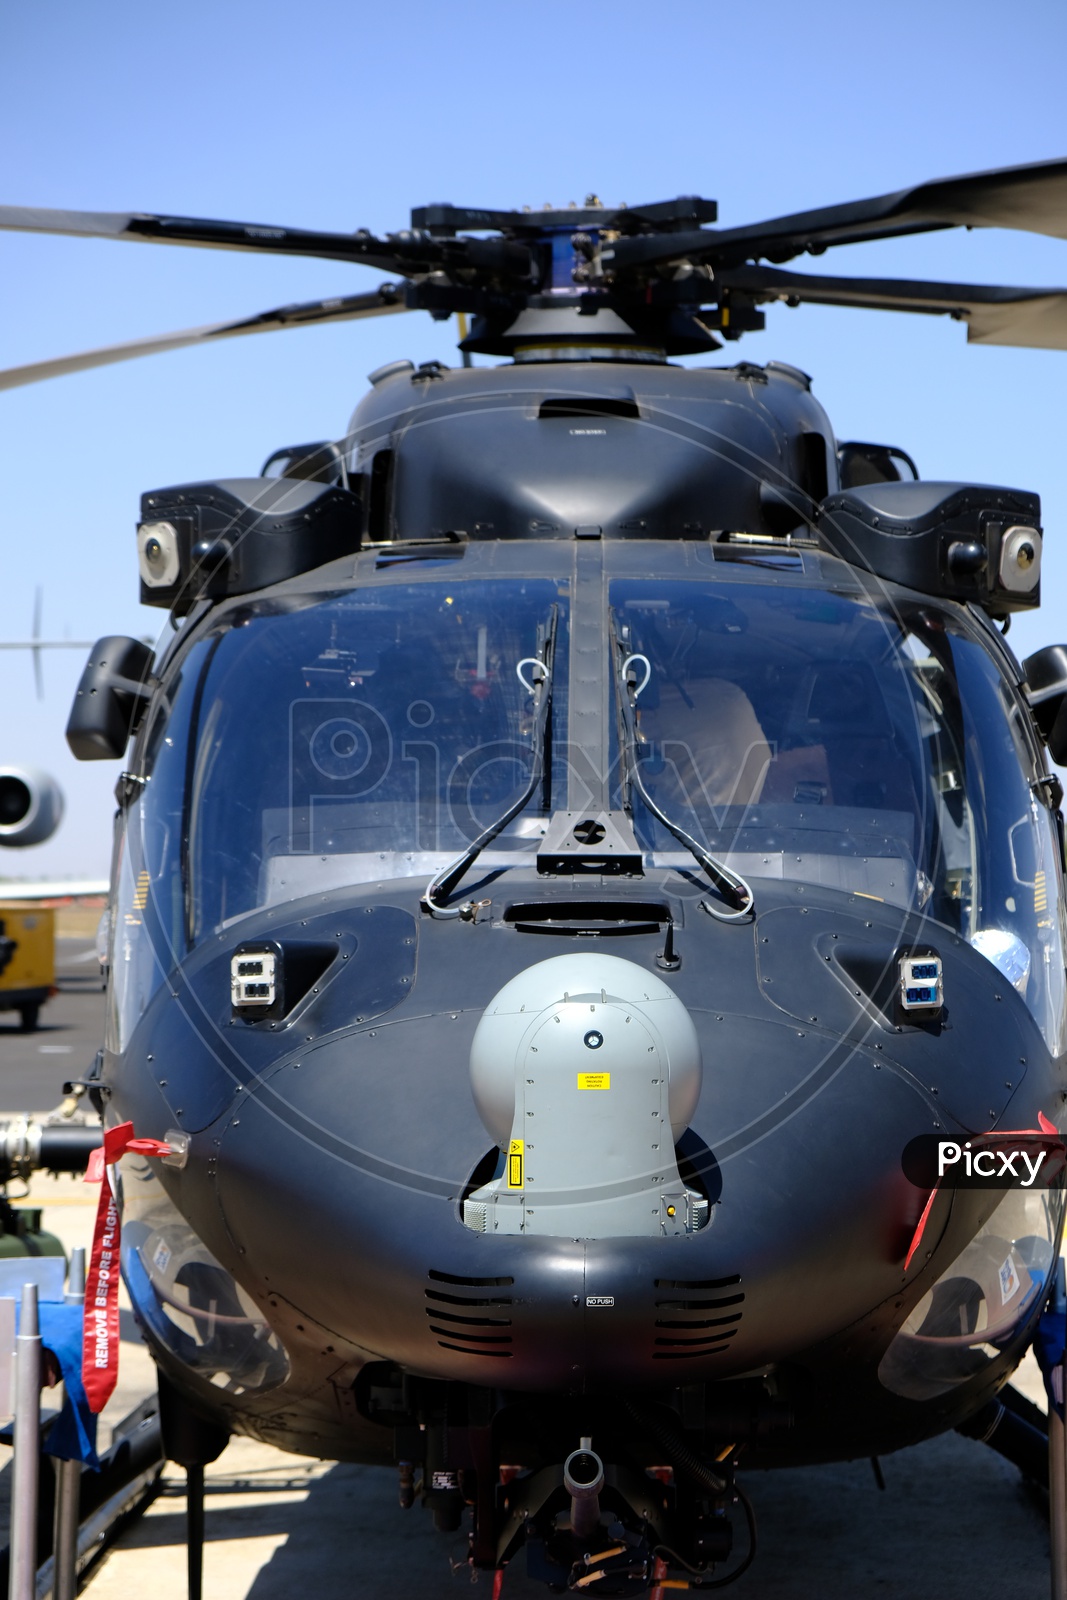 HAL Rudra is an Armed Version of ALH Dhruv at Bangalore Aero India Show 2019